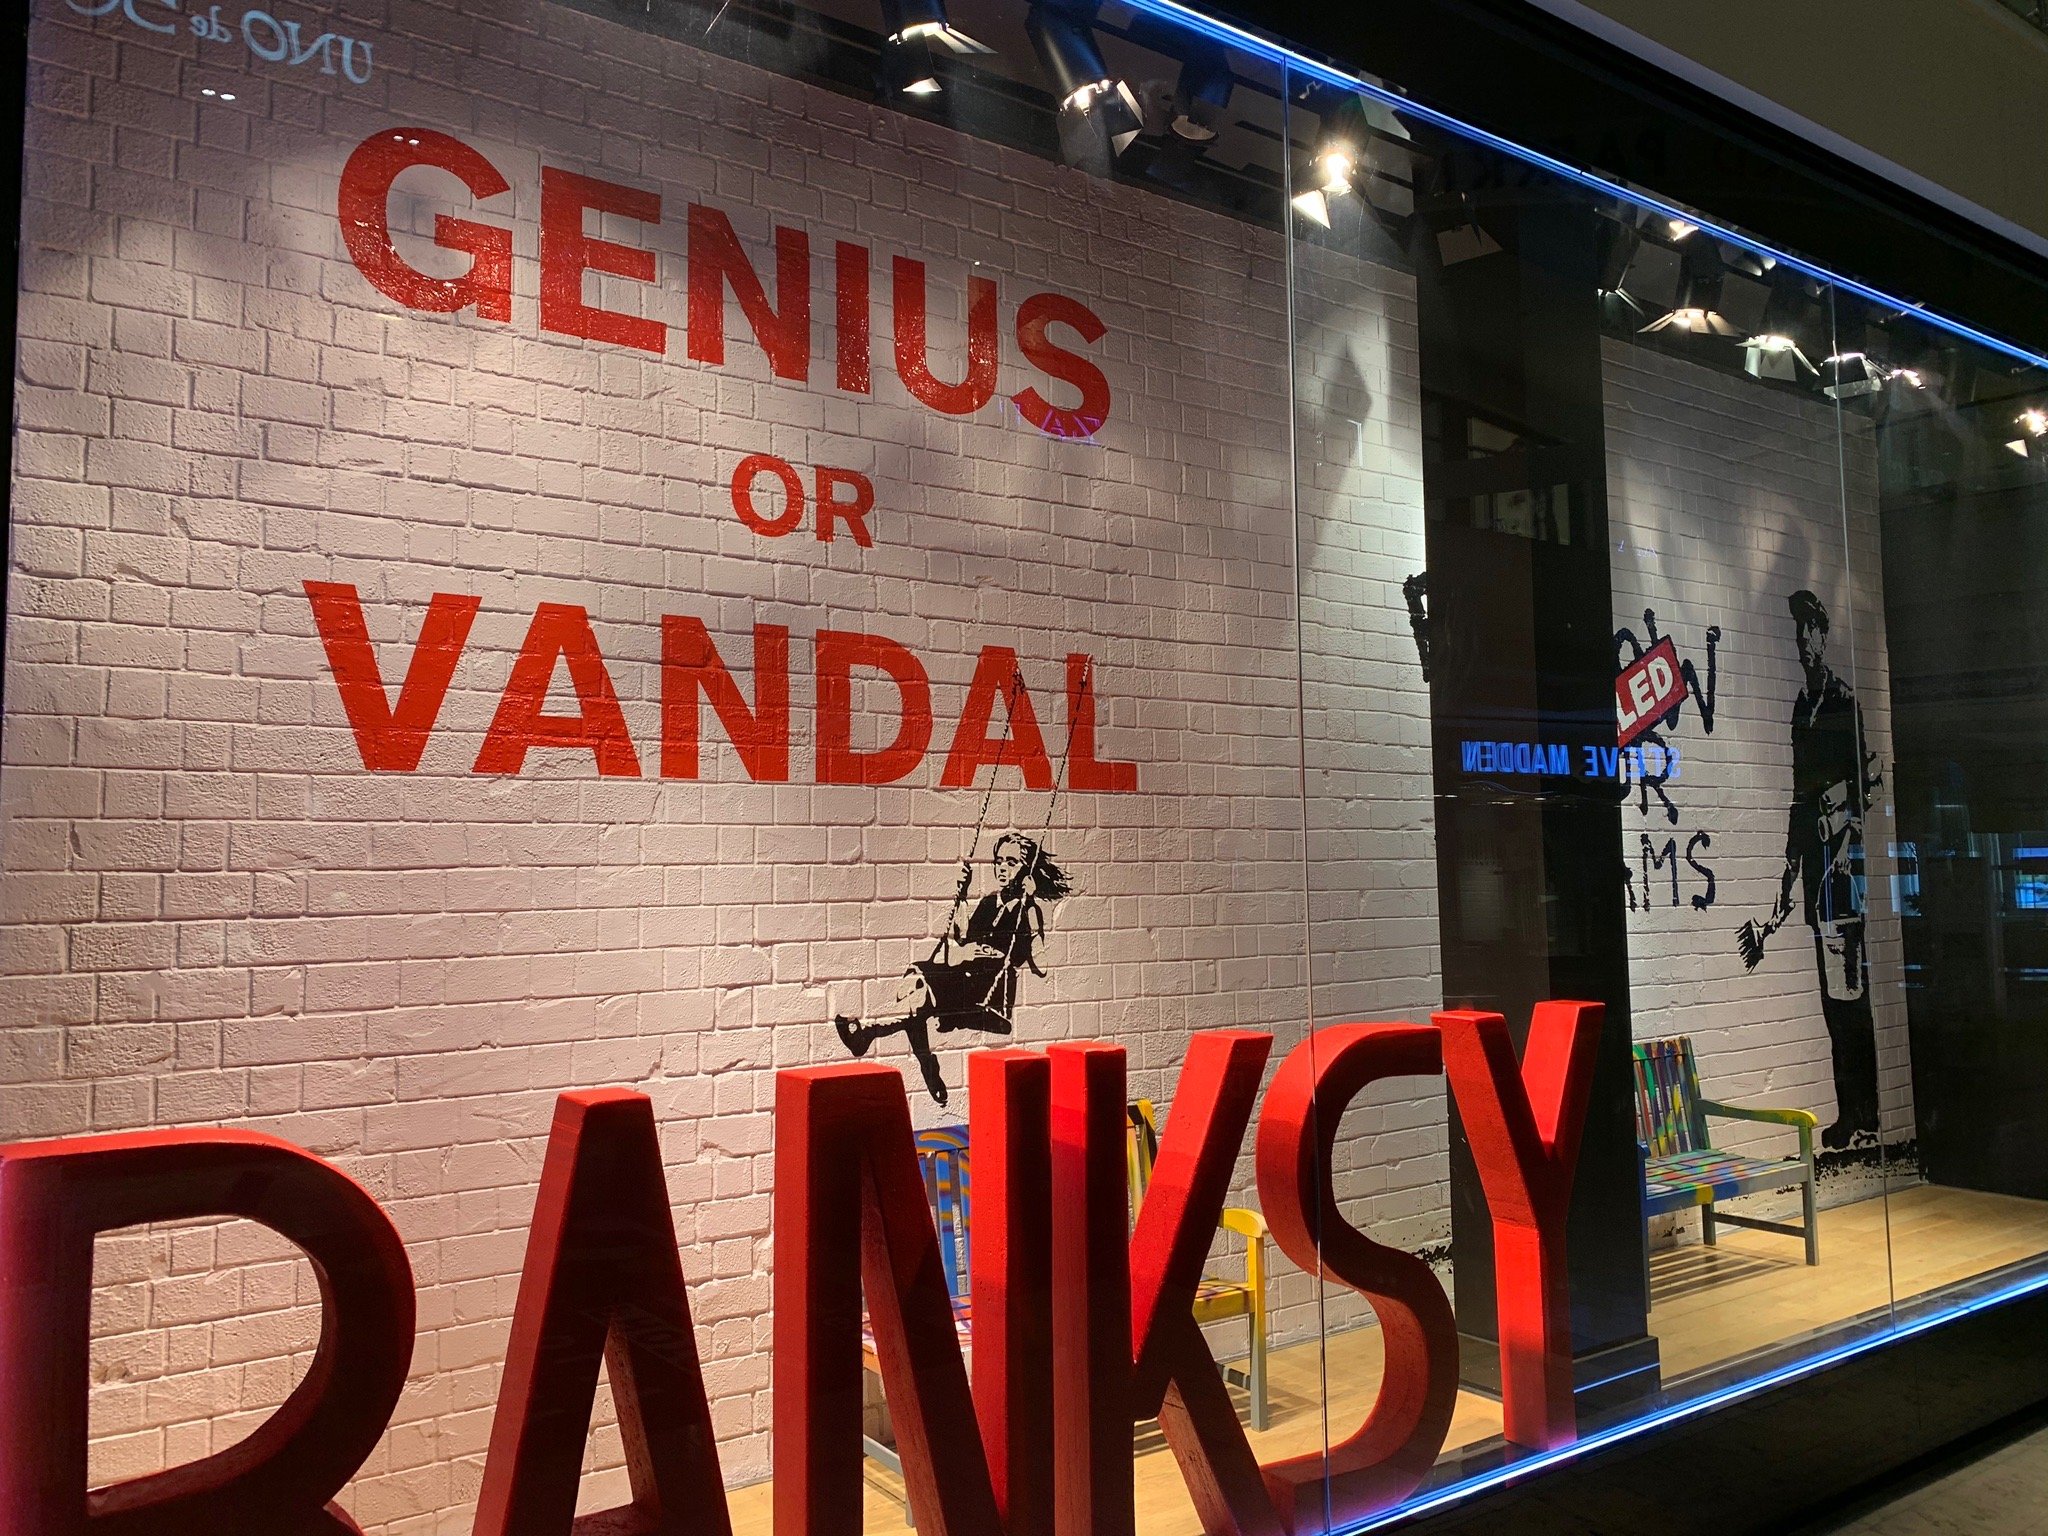 Banksy Exhibition: Genius or Vandal? - All You Need to Know BEFORE